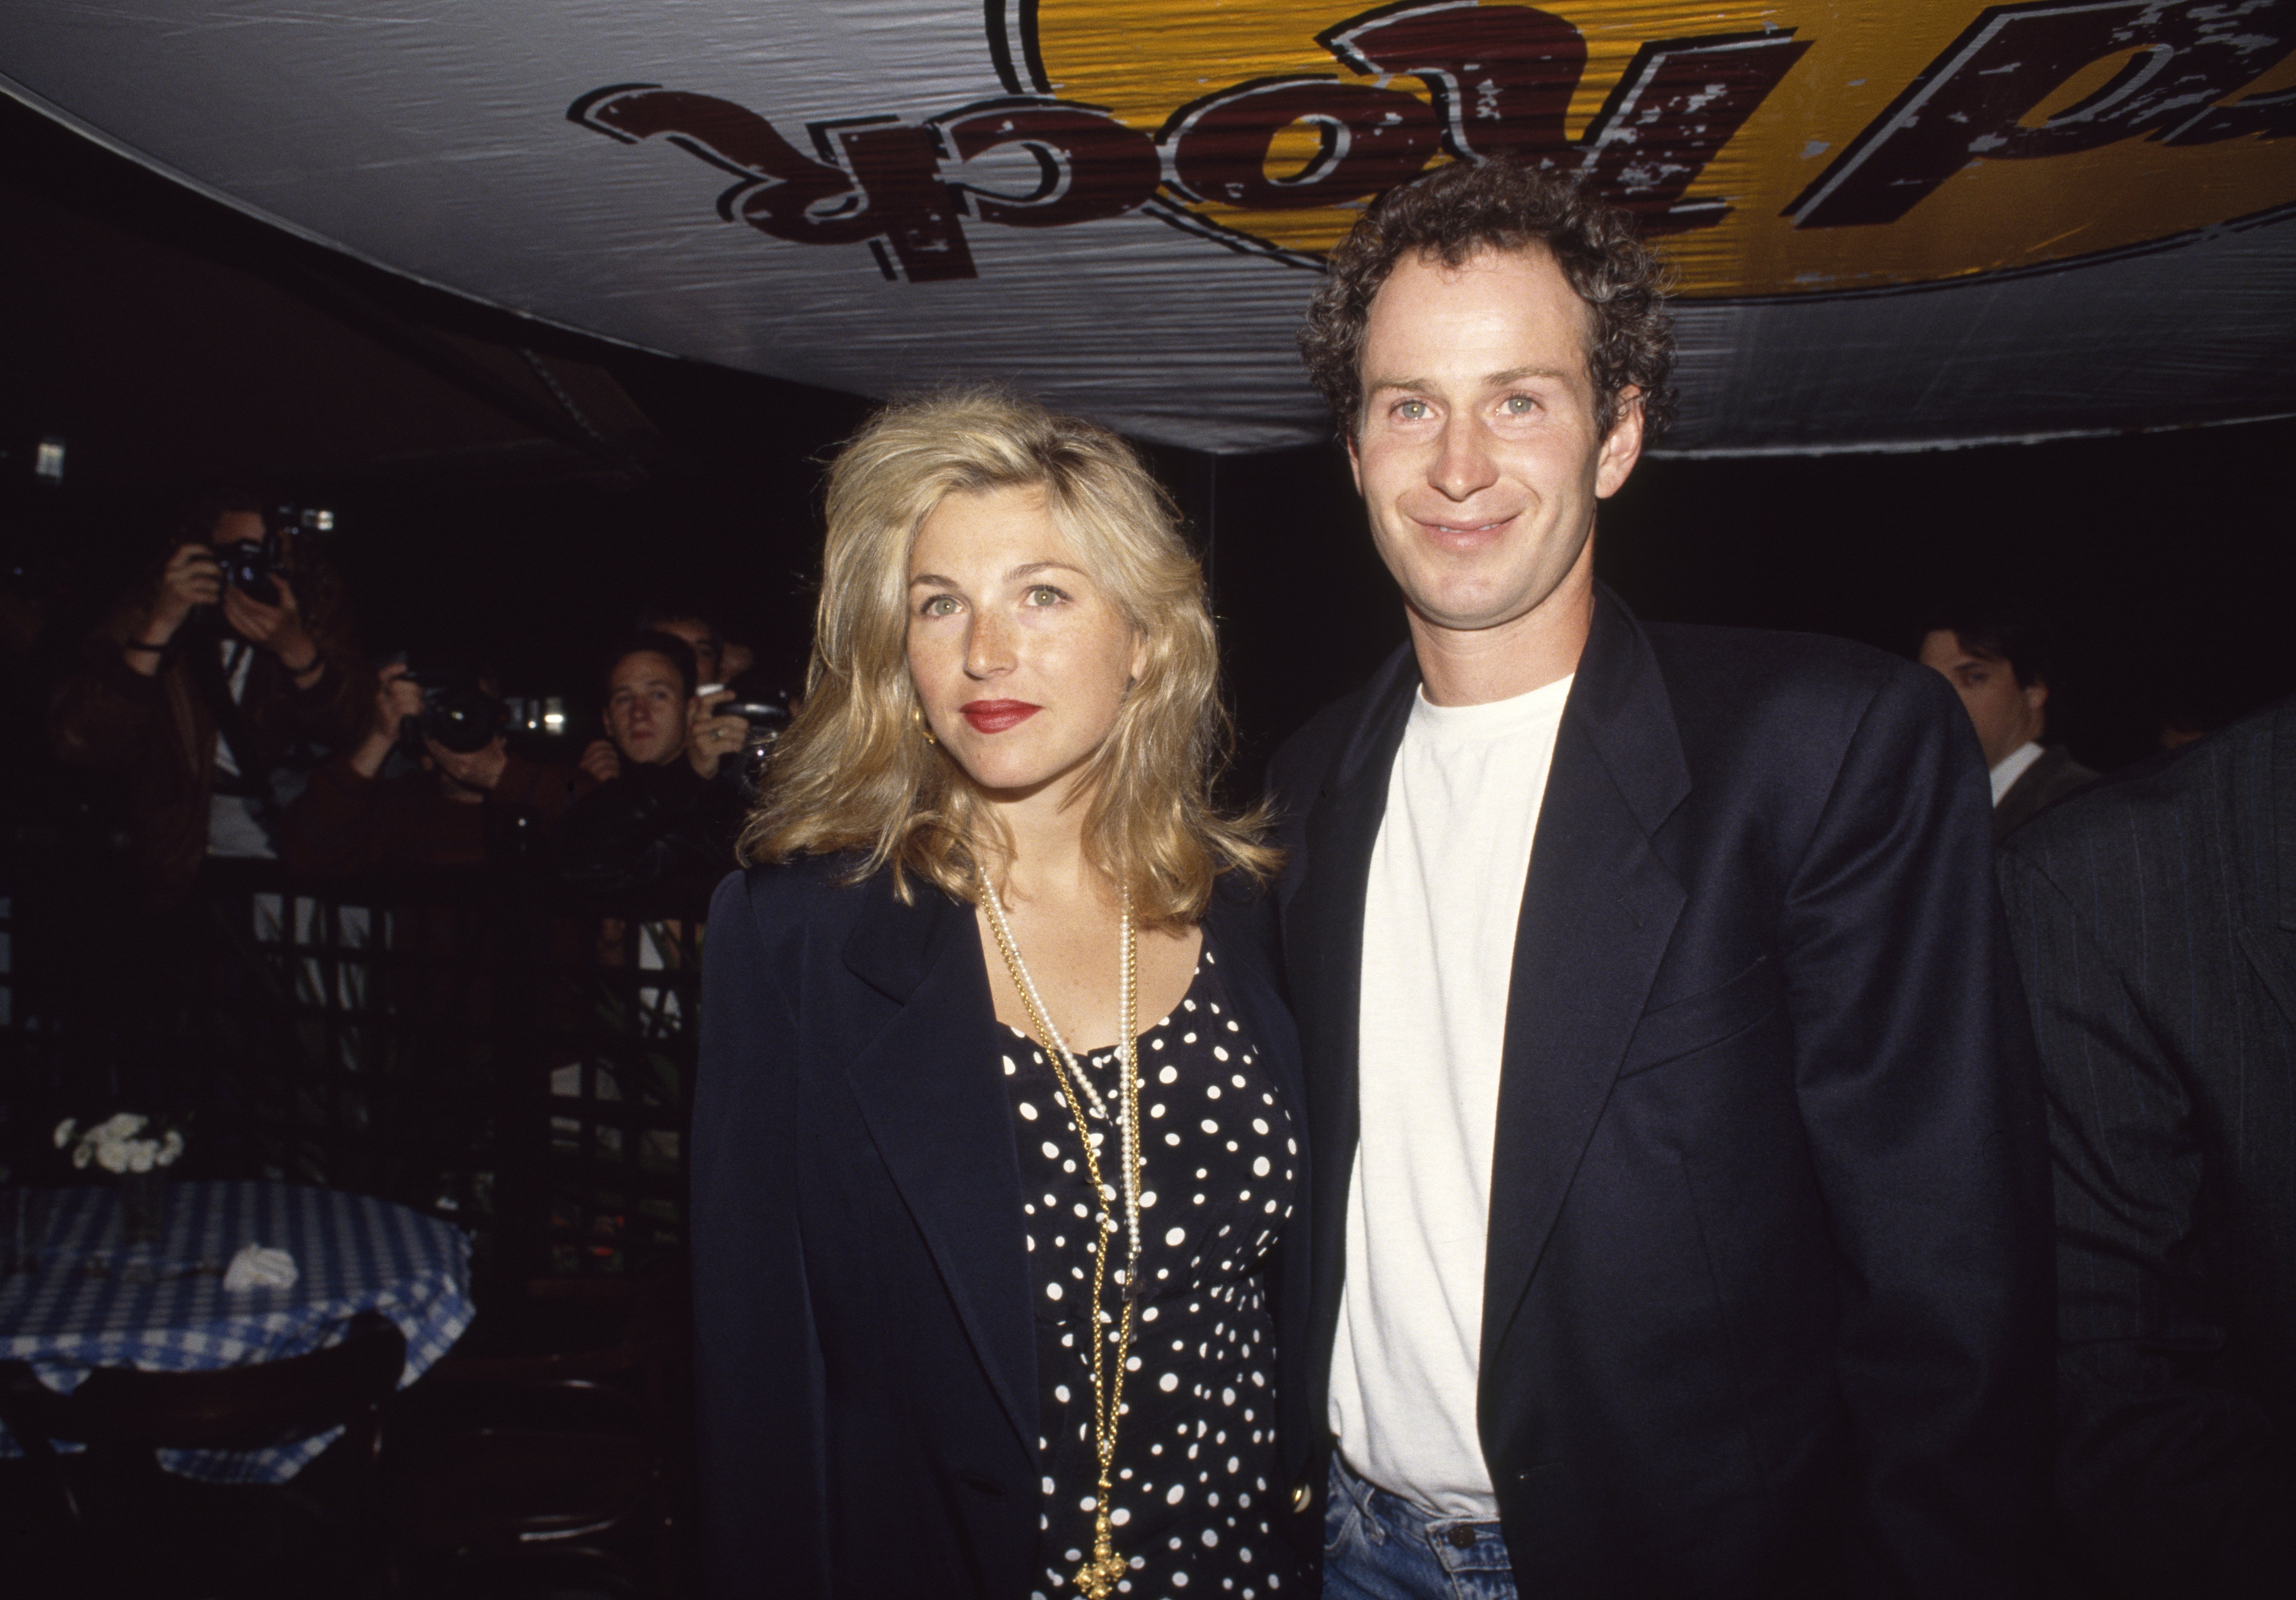 Tatum O'Neal and John McEnroe at the US Open Players' Party at the Hard Rock Cafe, 1990, New York City. | Photo: Getty Images